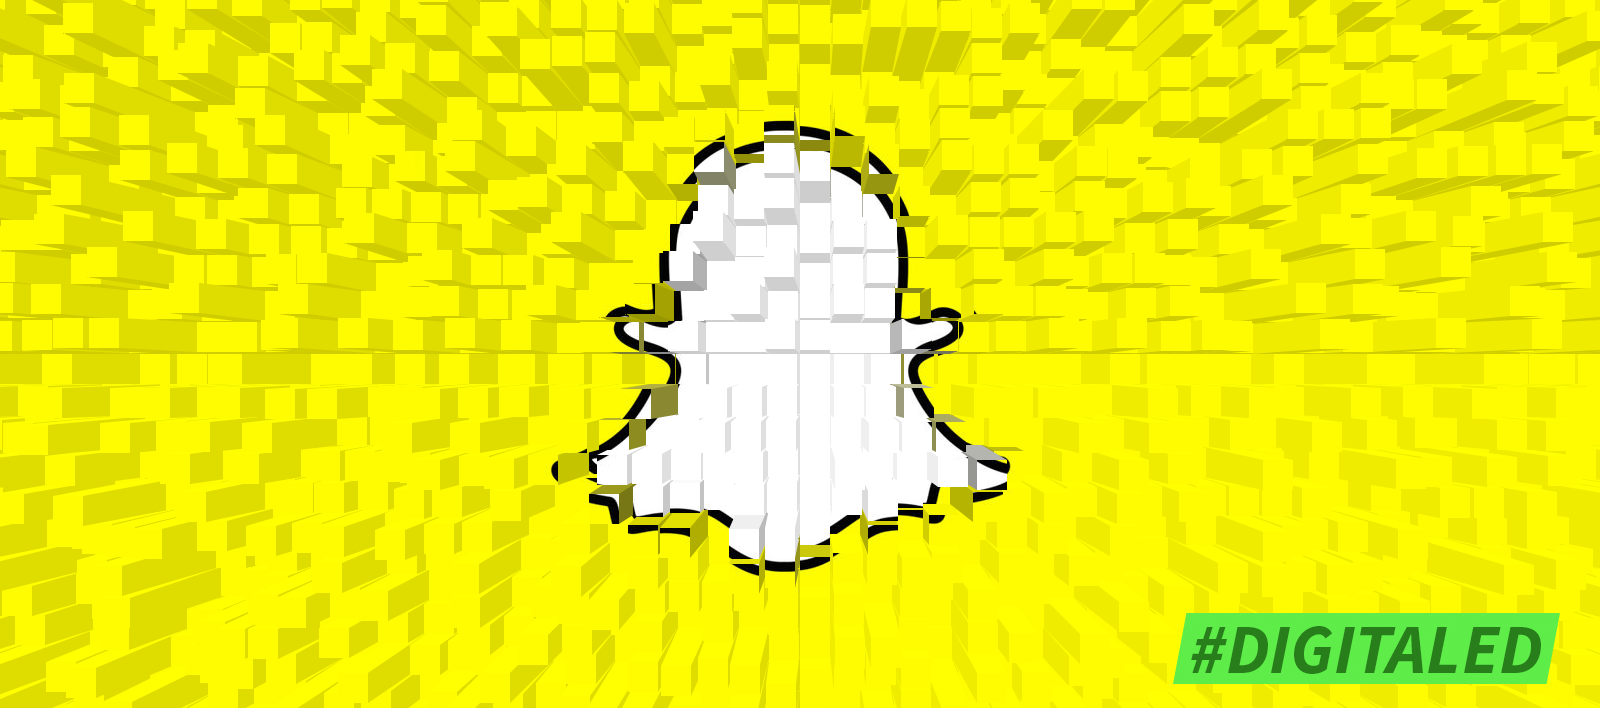 Snapchat graphic with DigitalEd logo